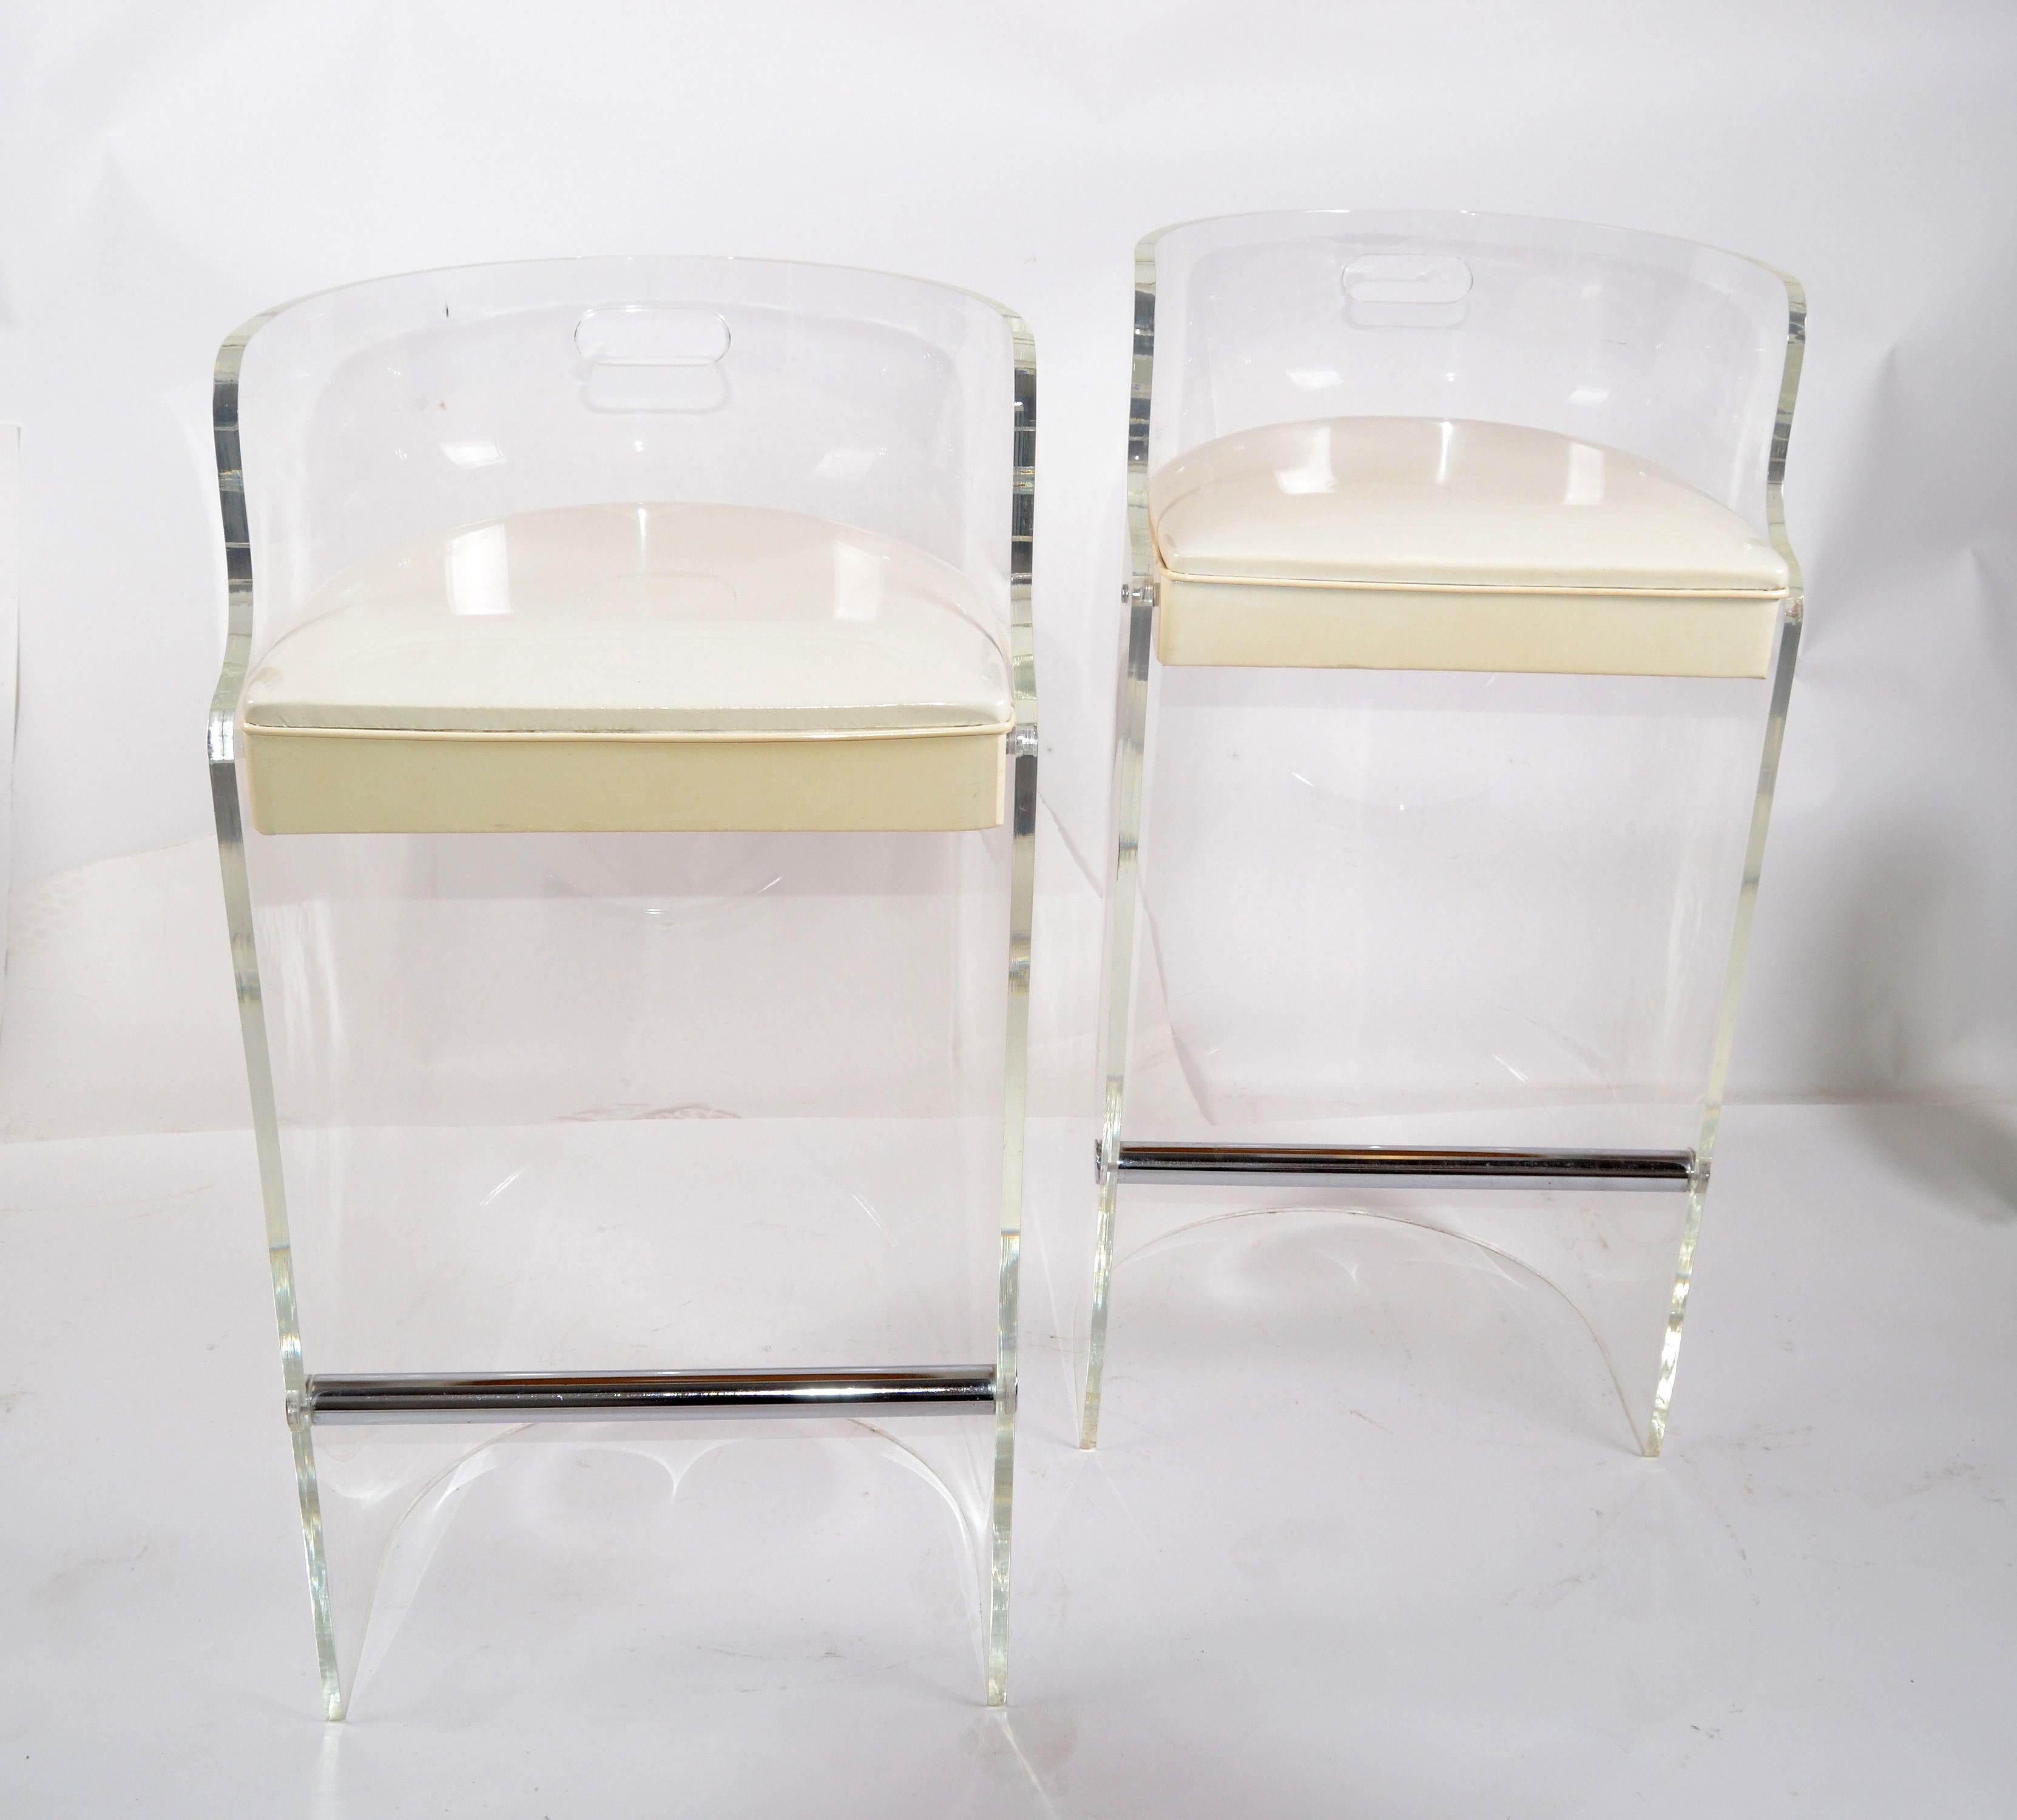 Pair of Mid-Century Modern Lucite and chrome bar stools designed by Charles Hollis Jones in the 1970s and made by Hill Manufacturing Corporation.
The bar stools have the original white patent leather seat upholstery.
The footrest is chrome, as